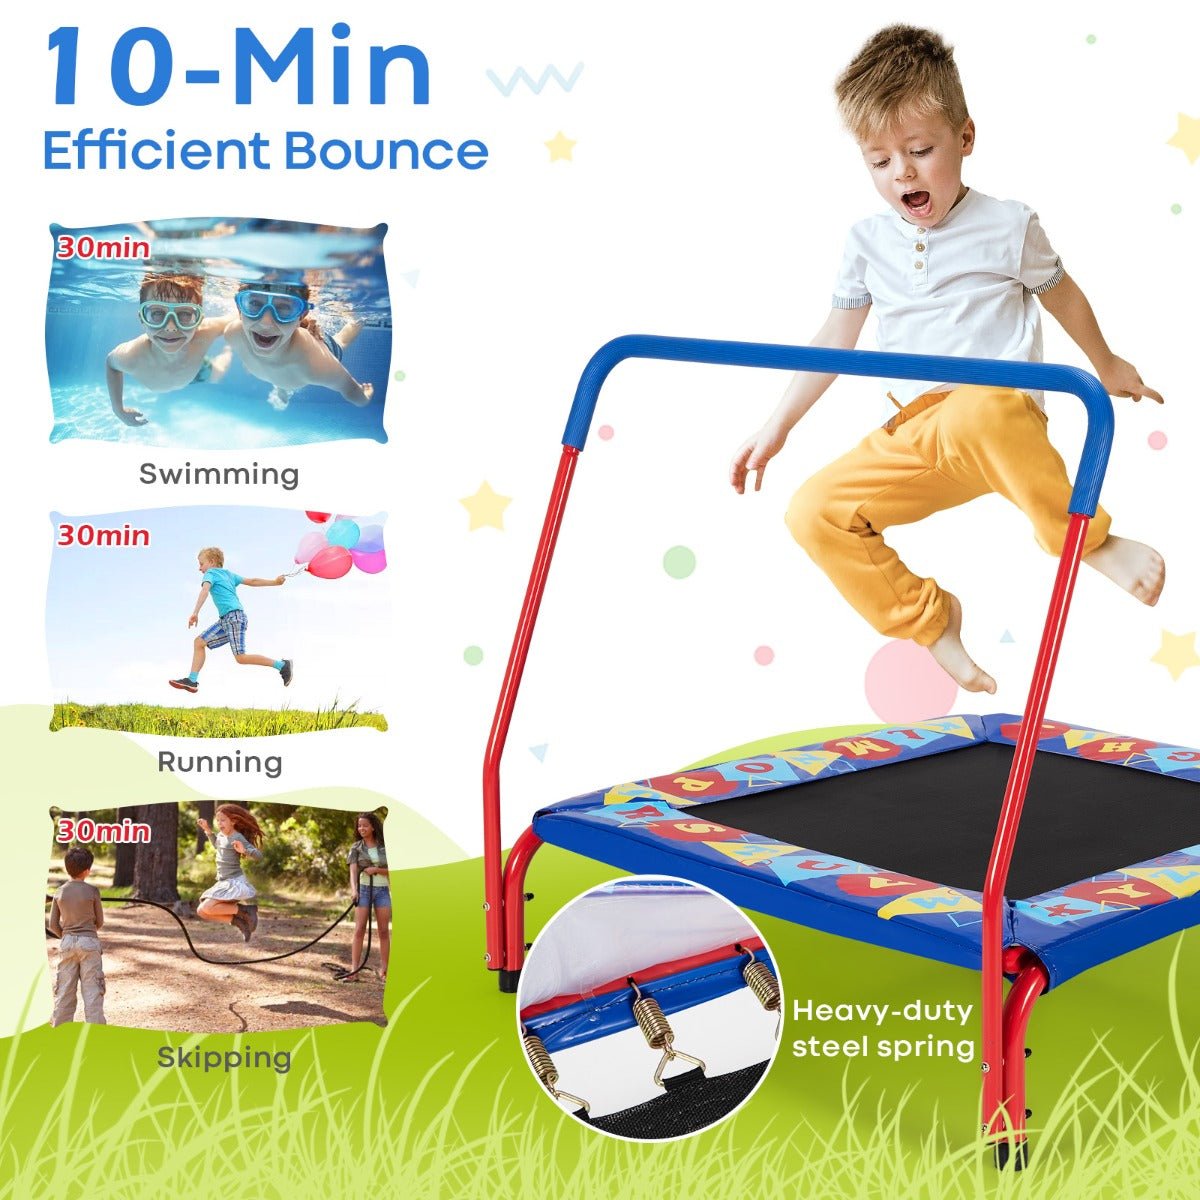 Boundless Fun: Square Toddler Trampoline with Foam Covered Handle for Kids